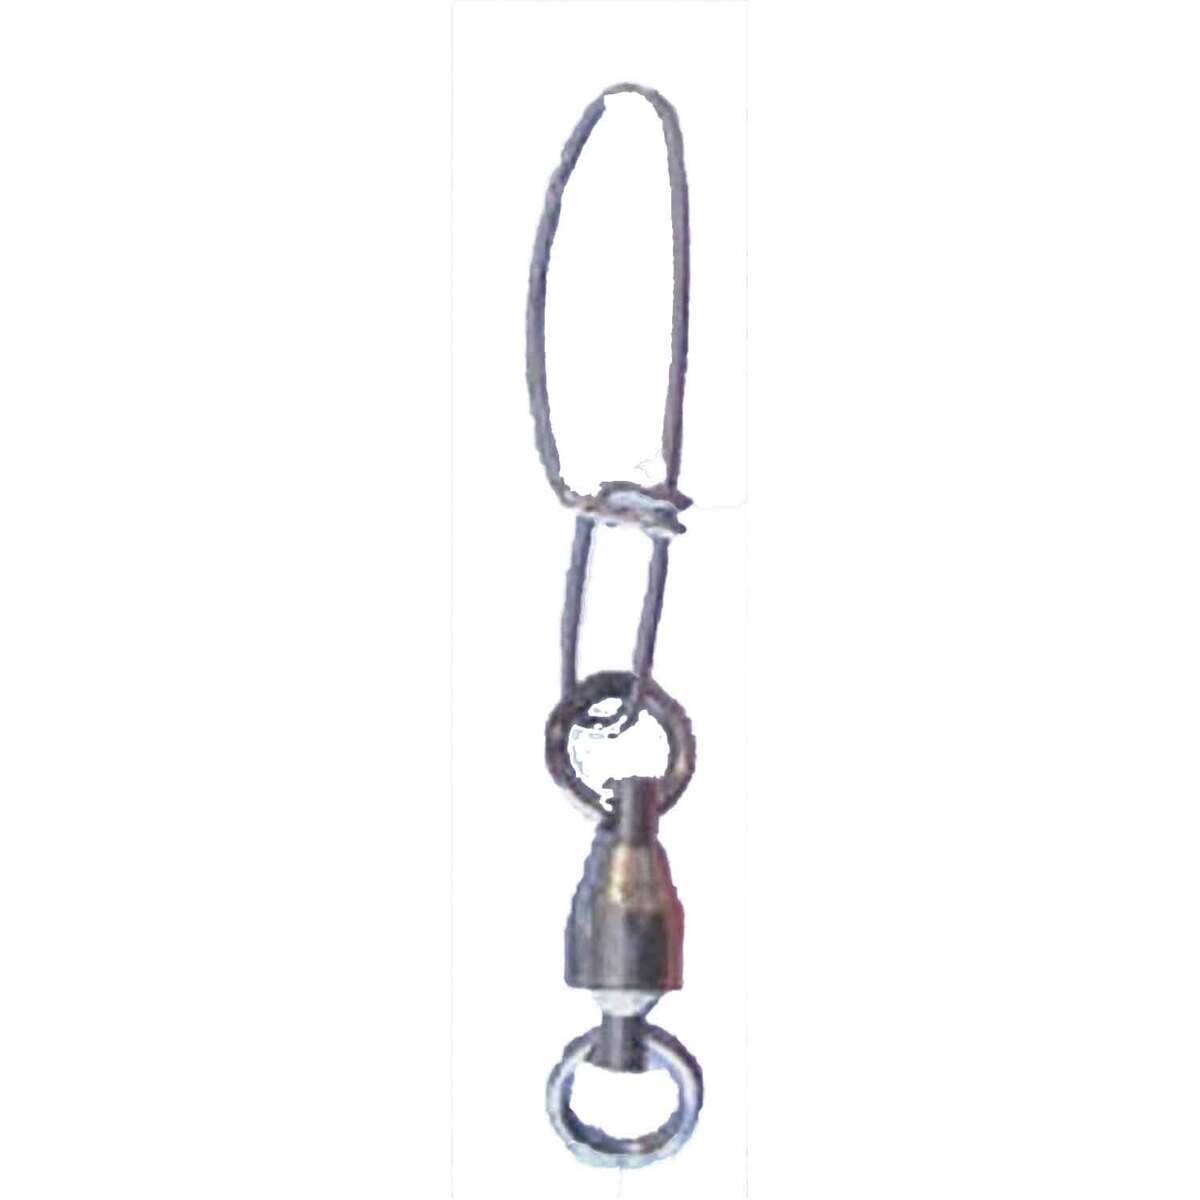 Opti Tackle, Ball Bearing Swivel with Duo-Lock Snap - Nickel by Sportsman's Warehouse